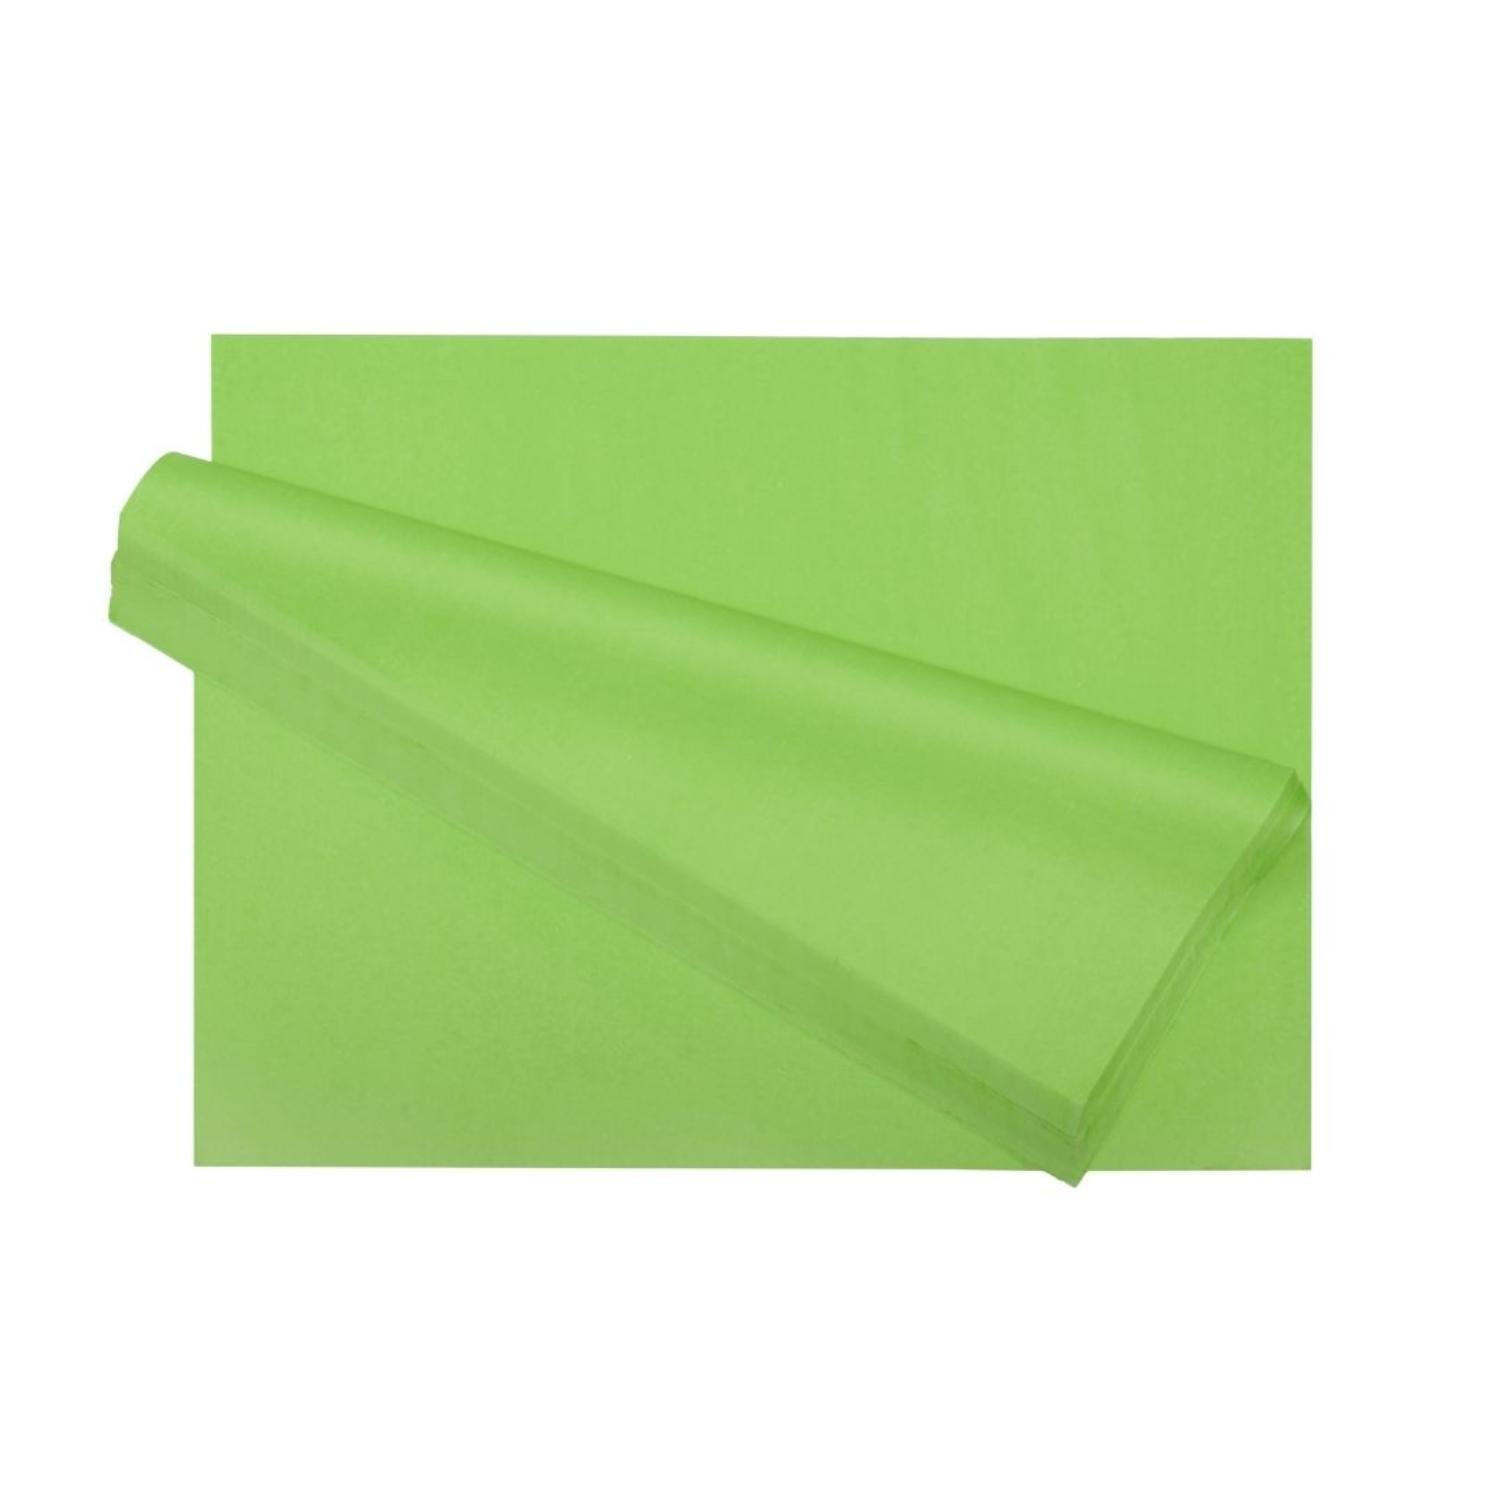 LIME TISSUE REAM 20" x 30" - 480 SHEETS